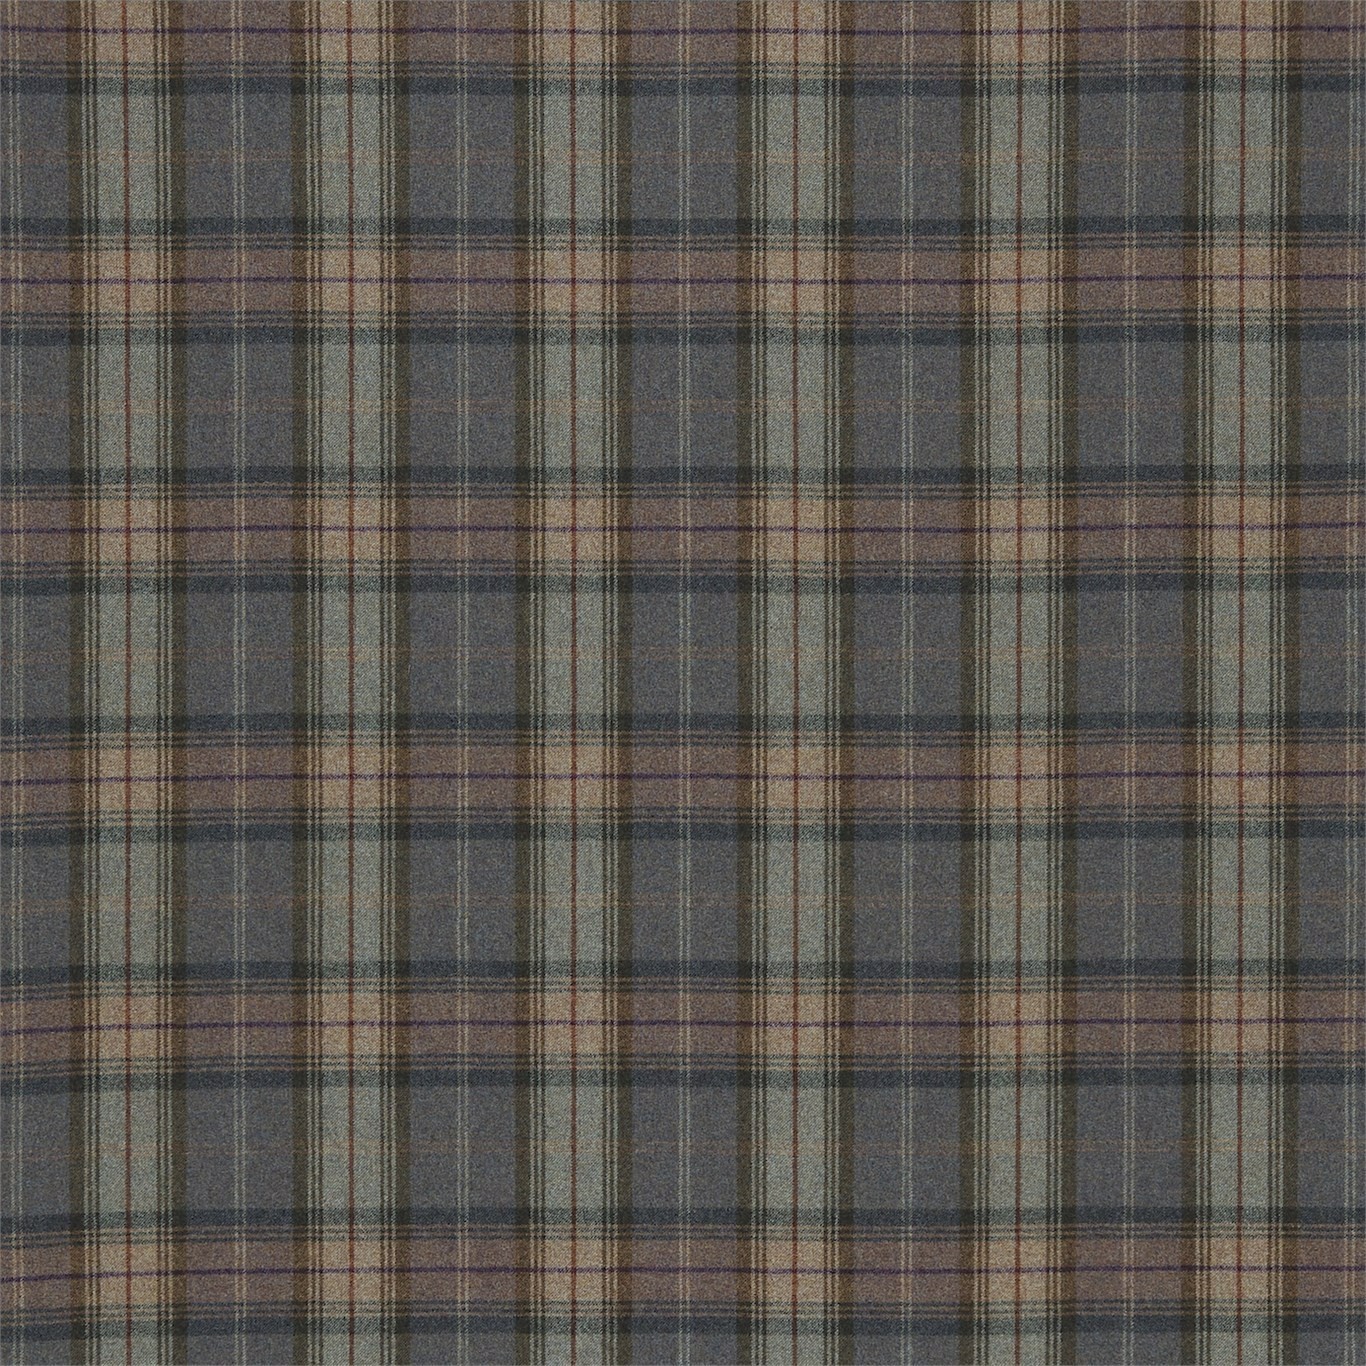 a plaid pattern with a brown, black, and grey color scheme